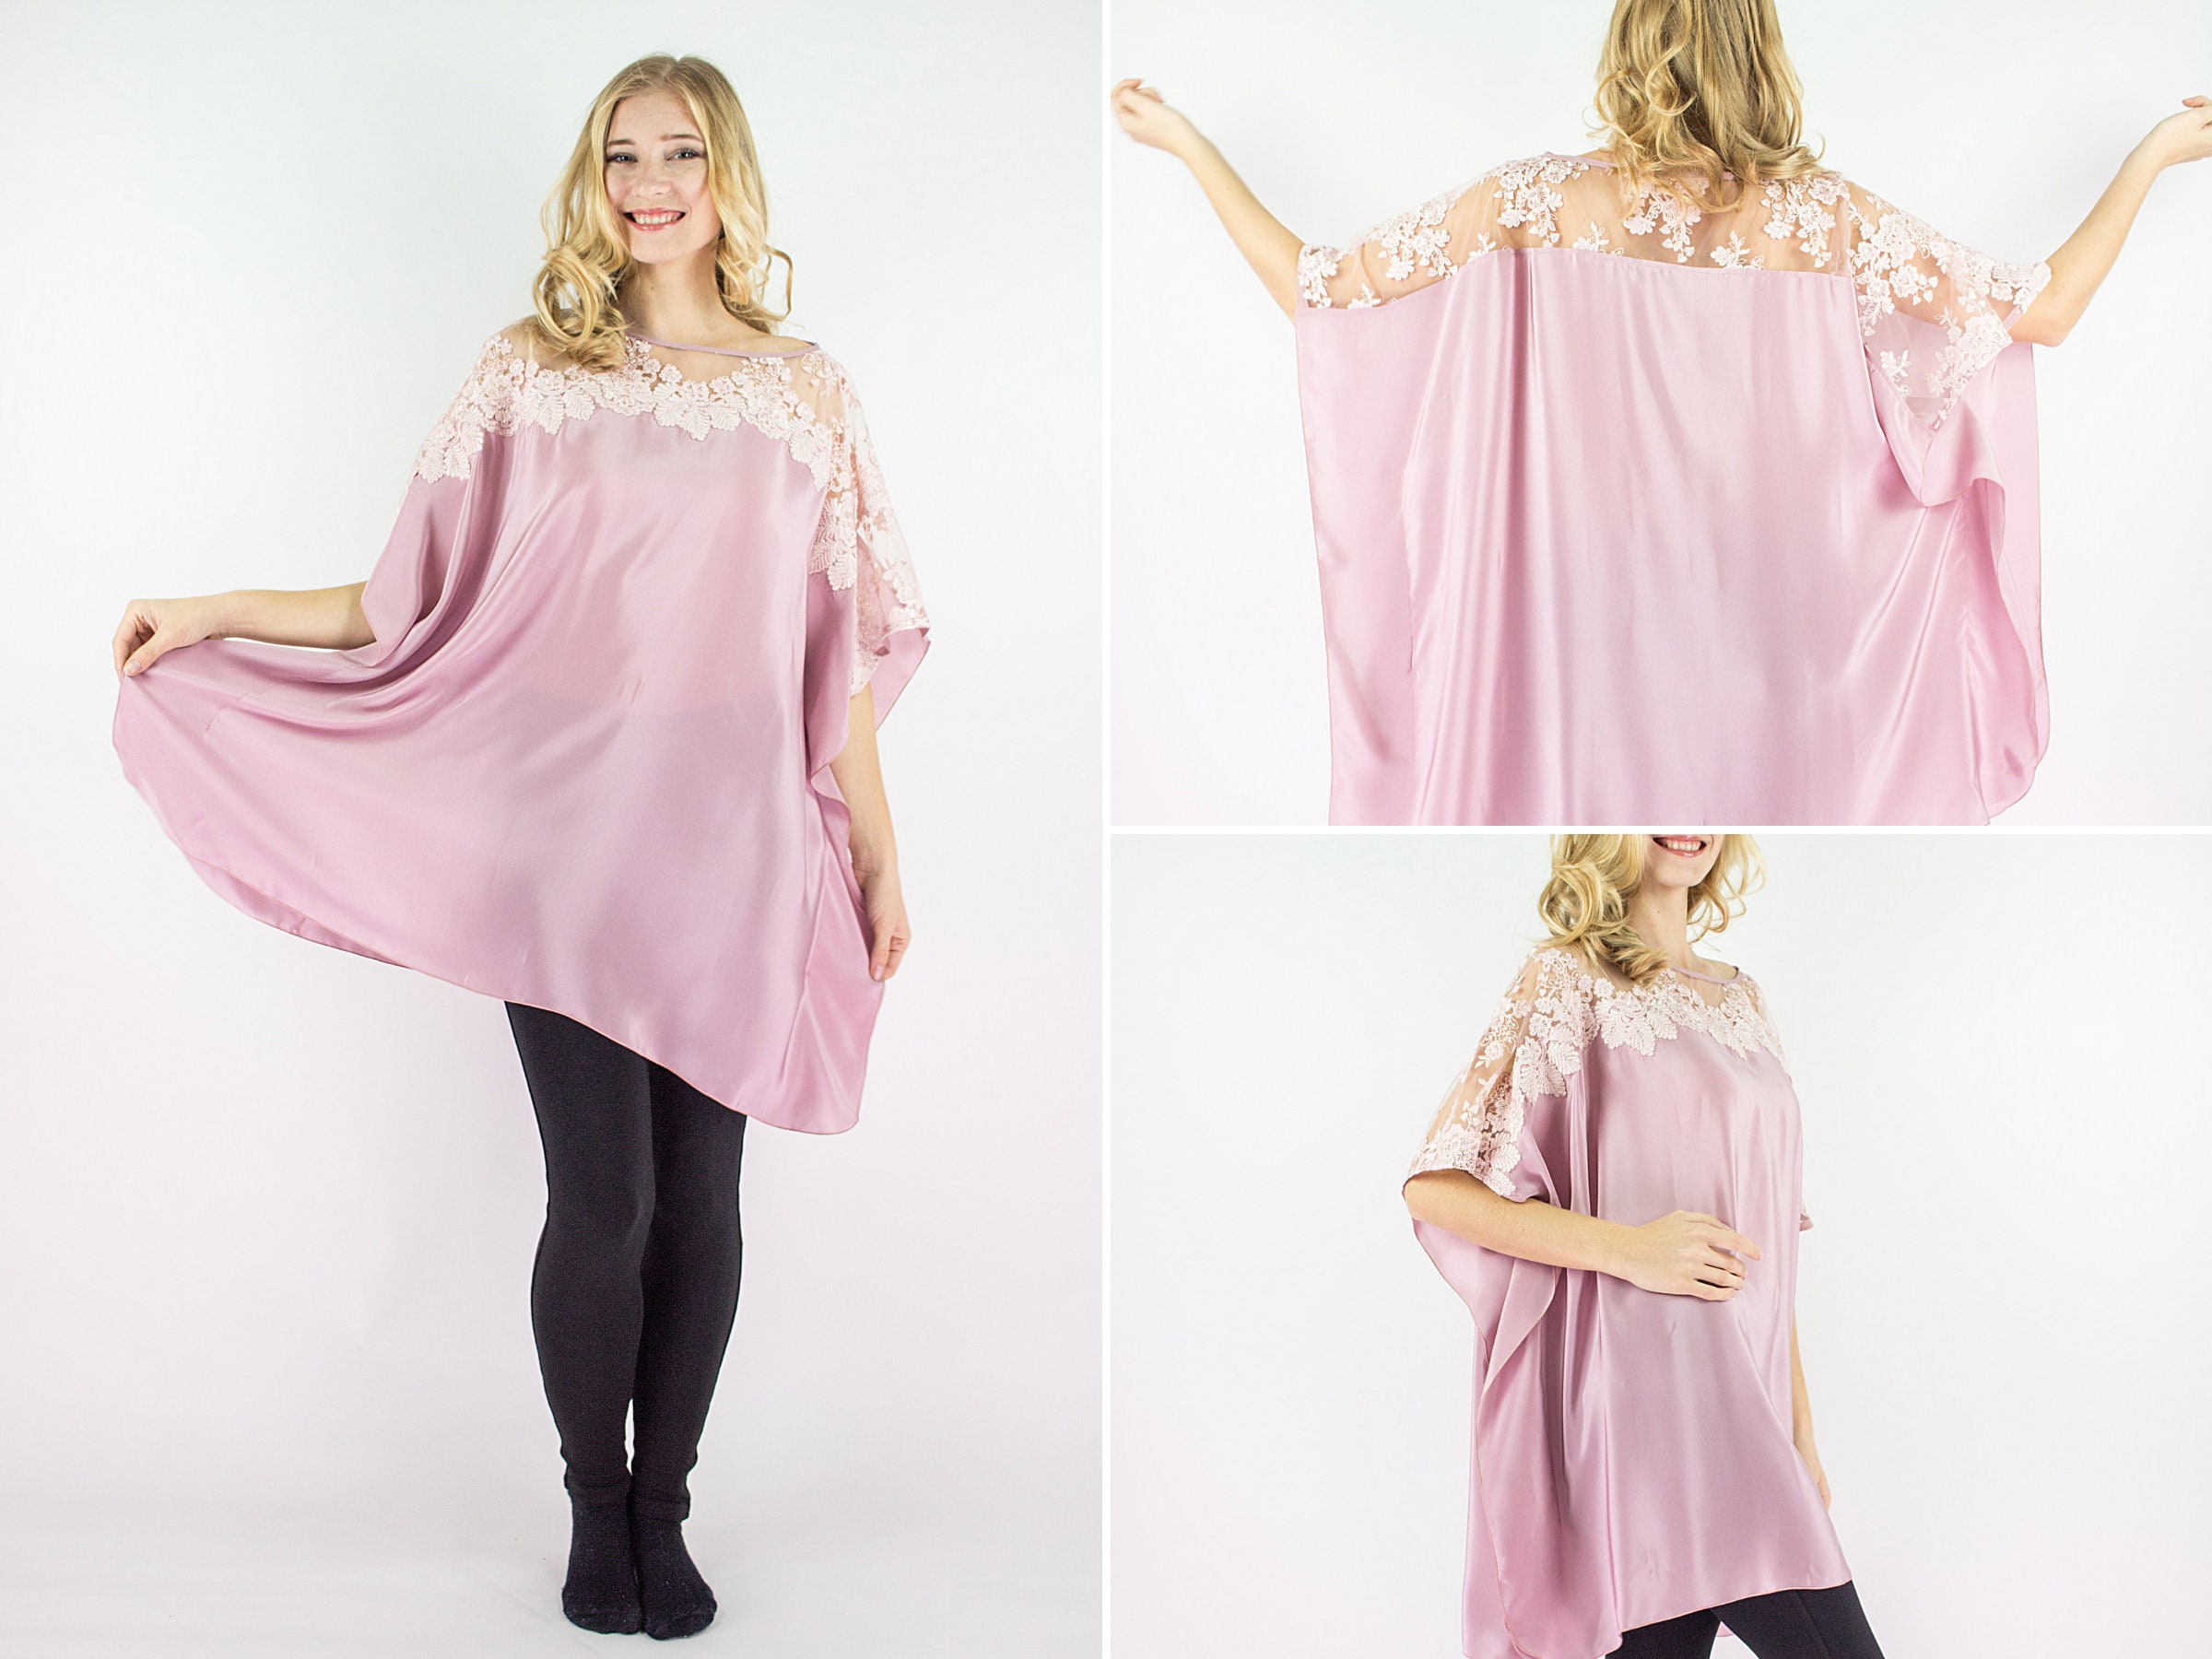 Italian Silk Oversized Tunic Dress Perfect Loose Fit Plus Size Clothing For Loungewear & Comfortable Wear Home